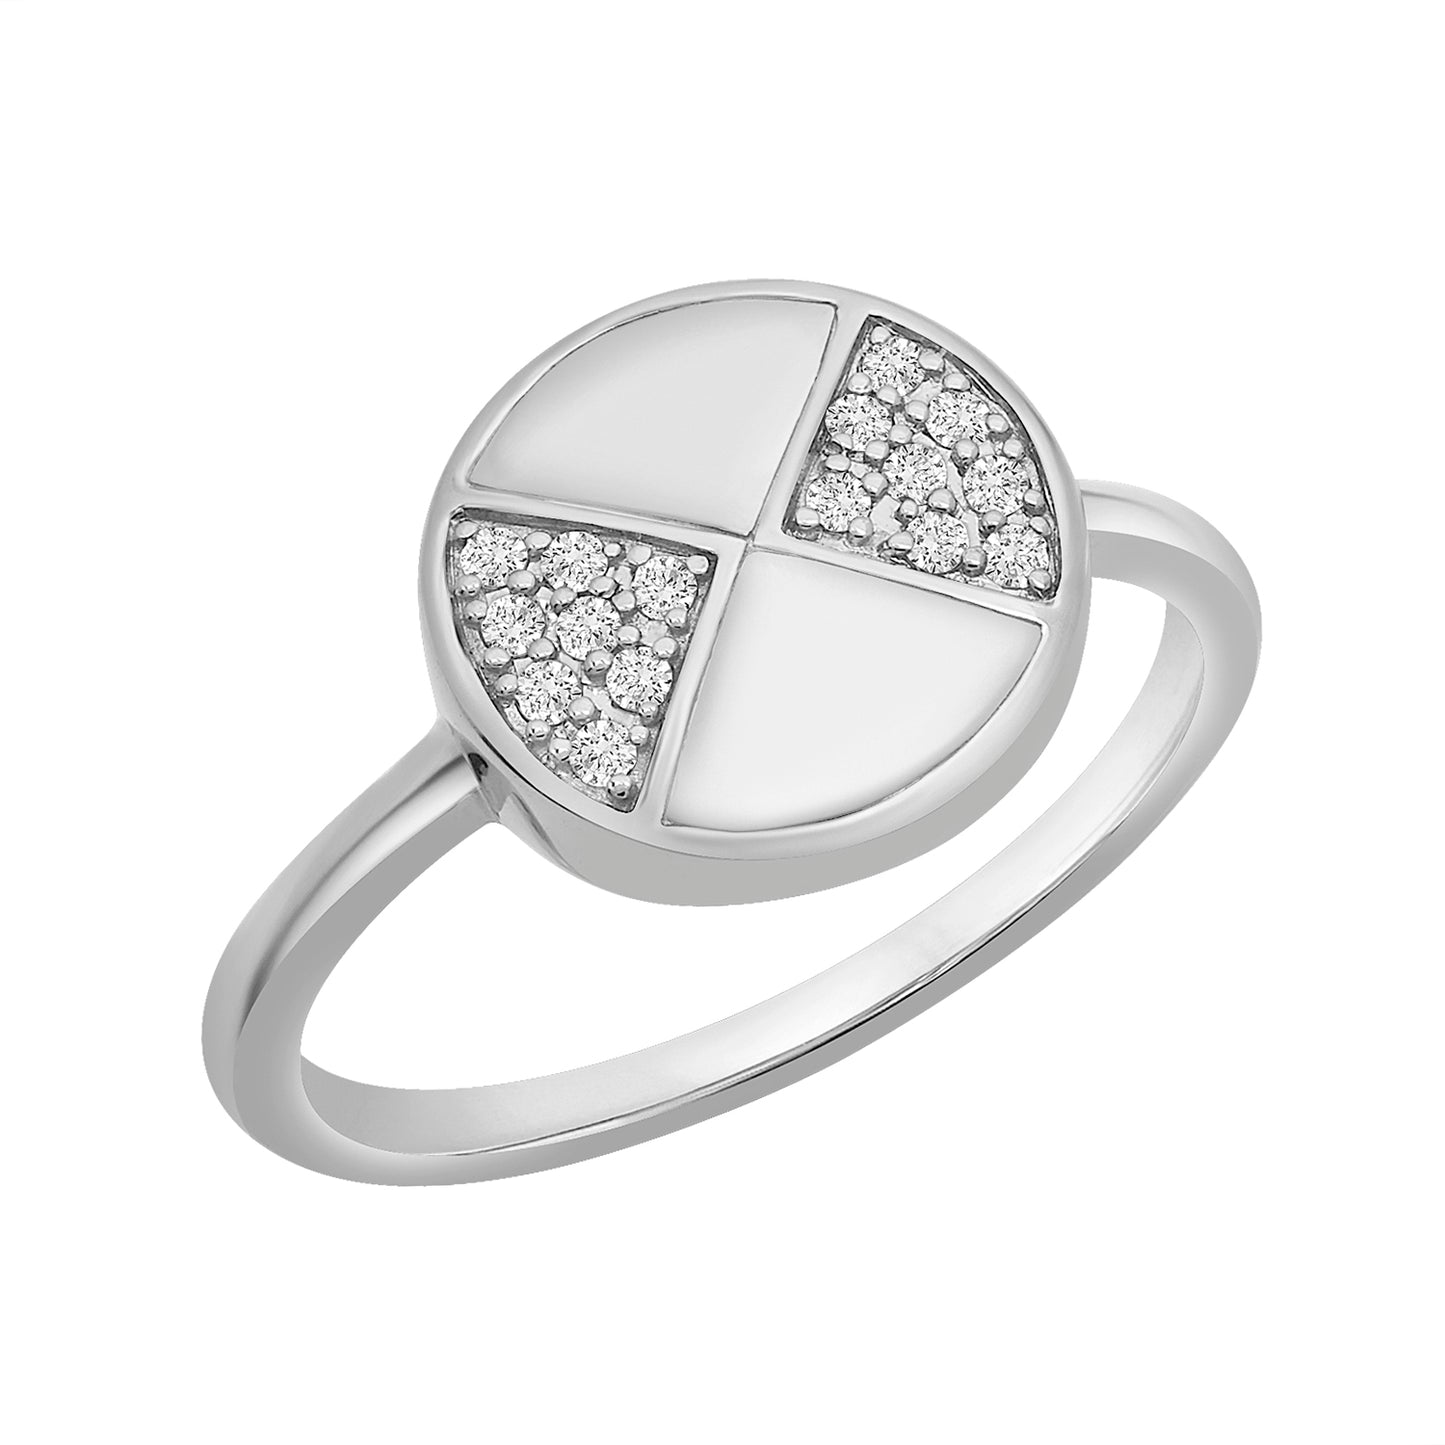 Cara Half Pave Diamond Circle Ring in Silver Coated